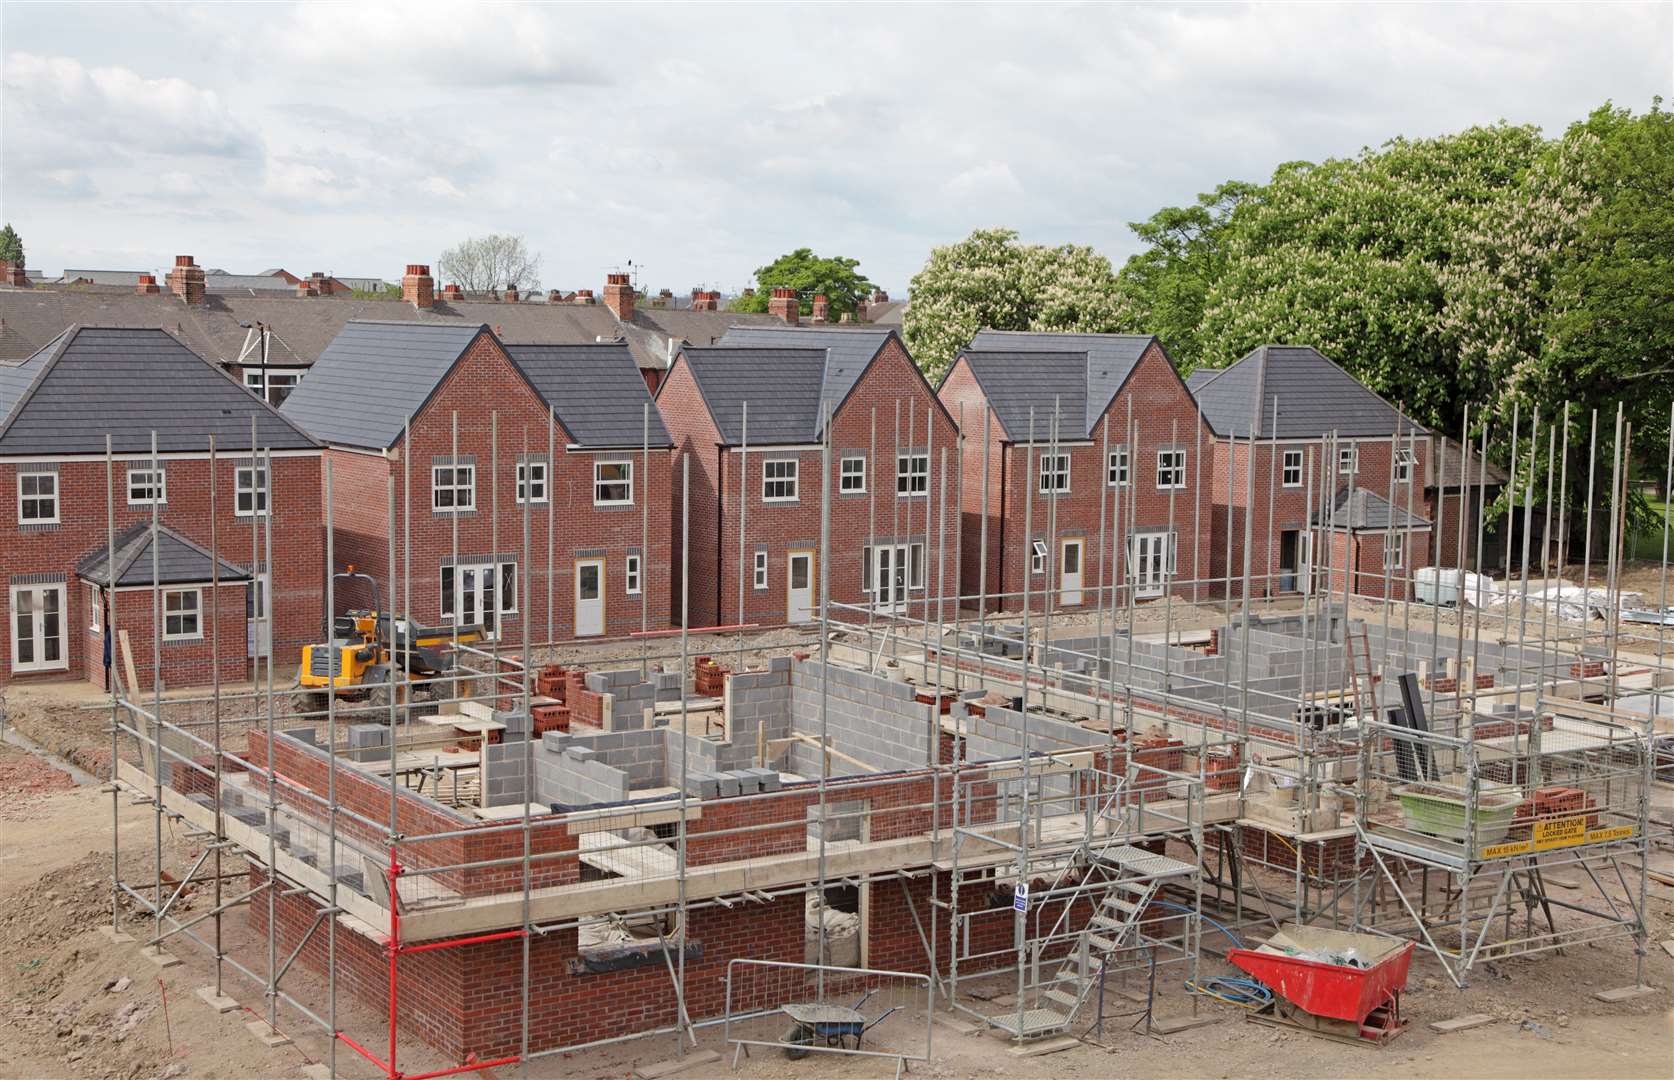 The blueprint sets out the development proposals for 27,000 new homes across the Medway Towns. Stock image